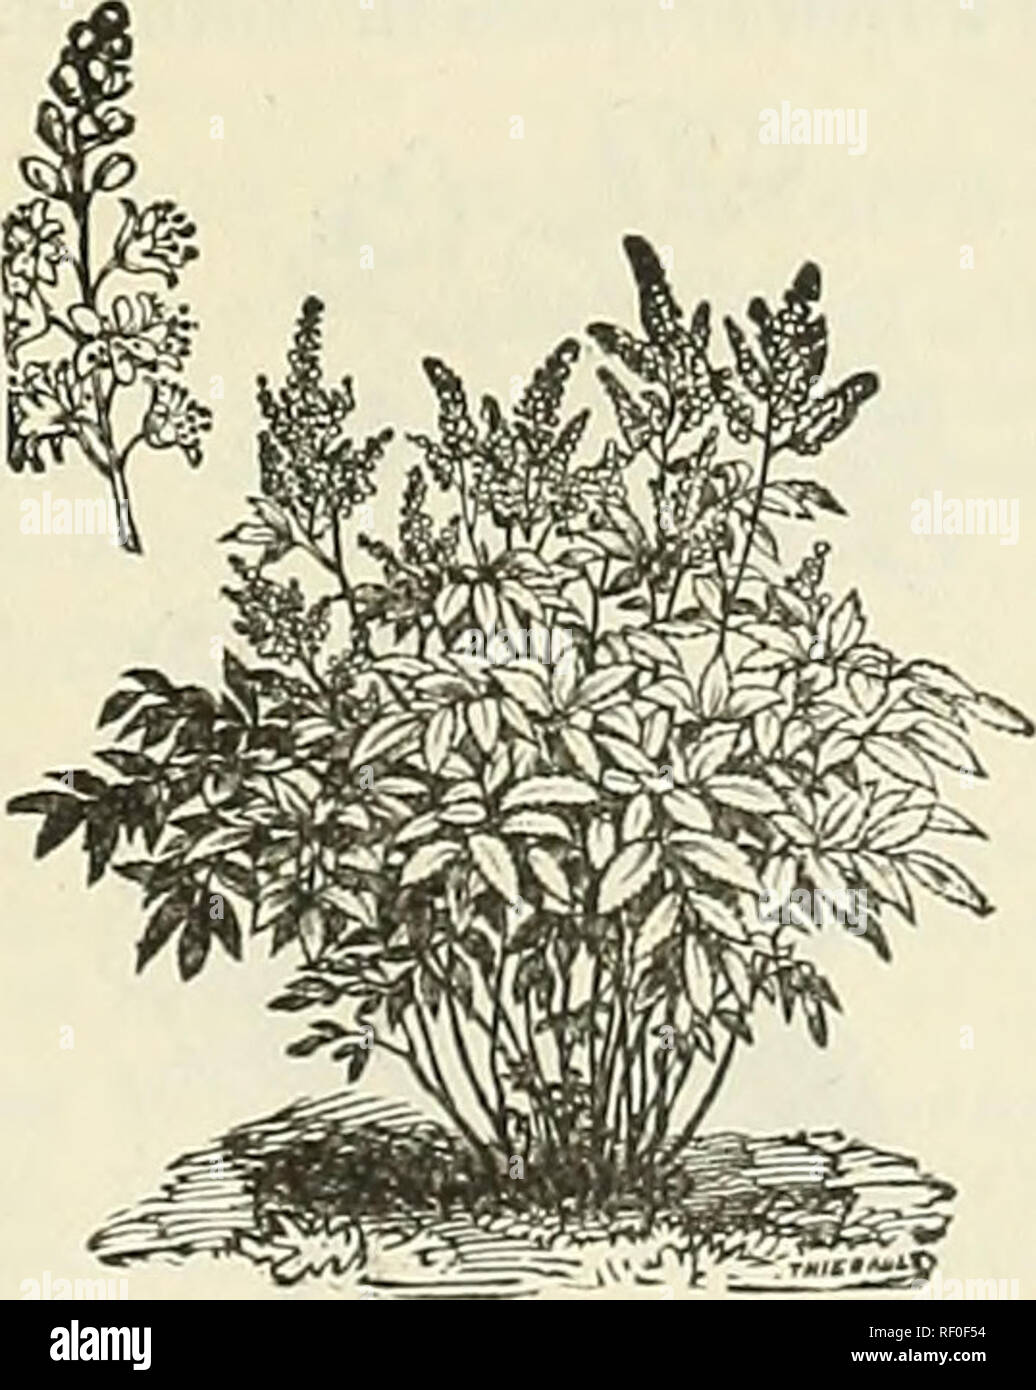 . Catalogue of nursery stock. Seed industry and trade Michigan Catalogs; Flowers Catalogs; Fruit Catalogs. HYDRANGEA THOMAS HOGG. PLUM (Prunus.) DoubIe= Flowering (P. Triloba)—A very desirable shrub introduced from Japan. Flowers semi-double, of delicate pink, upwards of an inch in diameter, thickly set. Hardy ; flowers in May. PRIVET (Ligustrum.) Scotch—A fine growing, branchy shrub, with deep green foliage and white flow- ers, followed in the Autumn by dark purple berries. Valuable fcr ornamental hedges. Golden Variegated ( Aurea Variegated)— Leaves of a striped golden color with yel- lowish Stock Photo